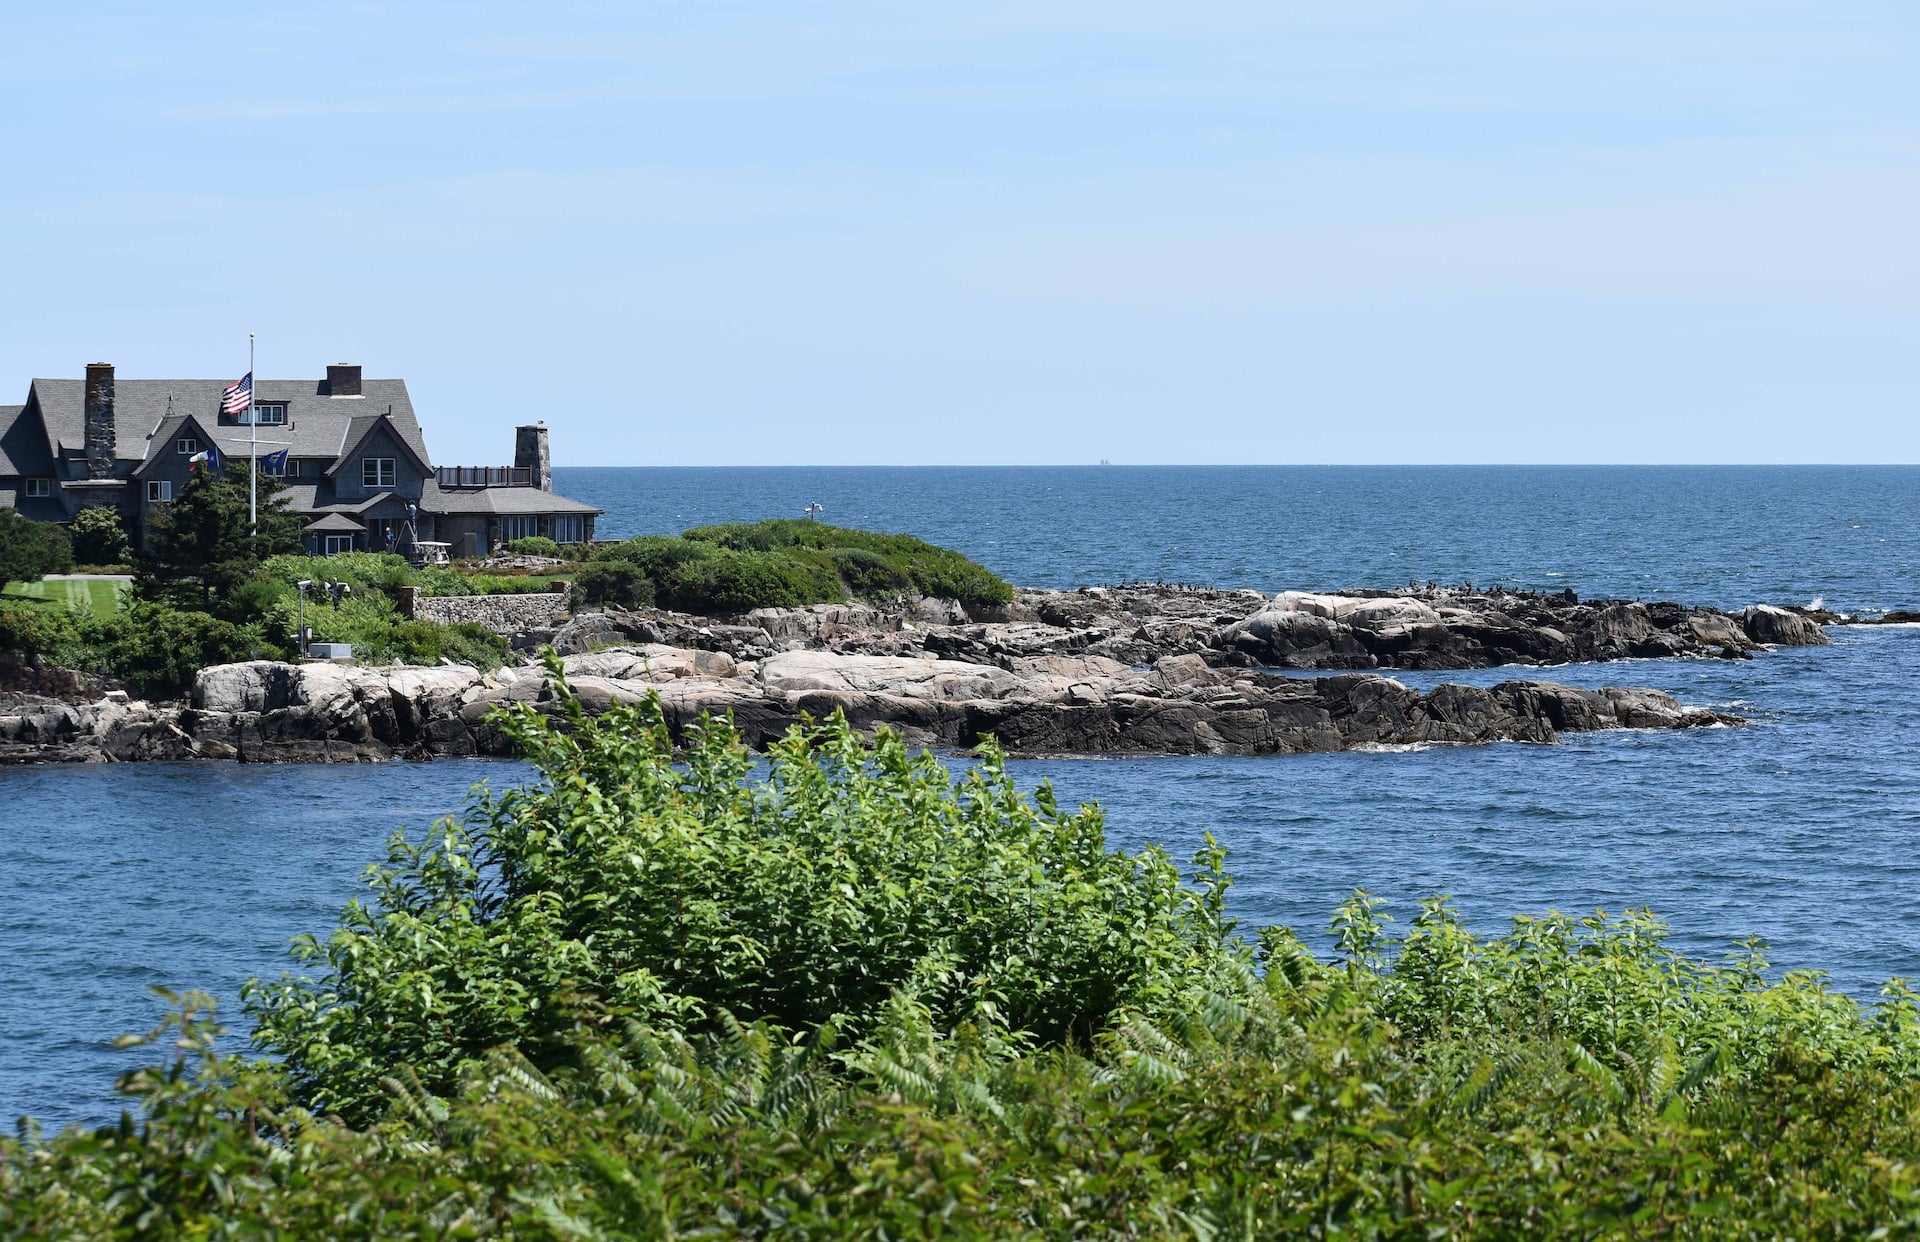 Looking out at the Atlantic Ocean at one side of the Bush Estate, with a sailboat far off, and birds on the rocks - Kennebunkport, Maine